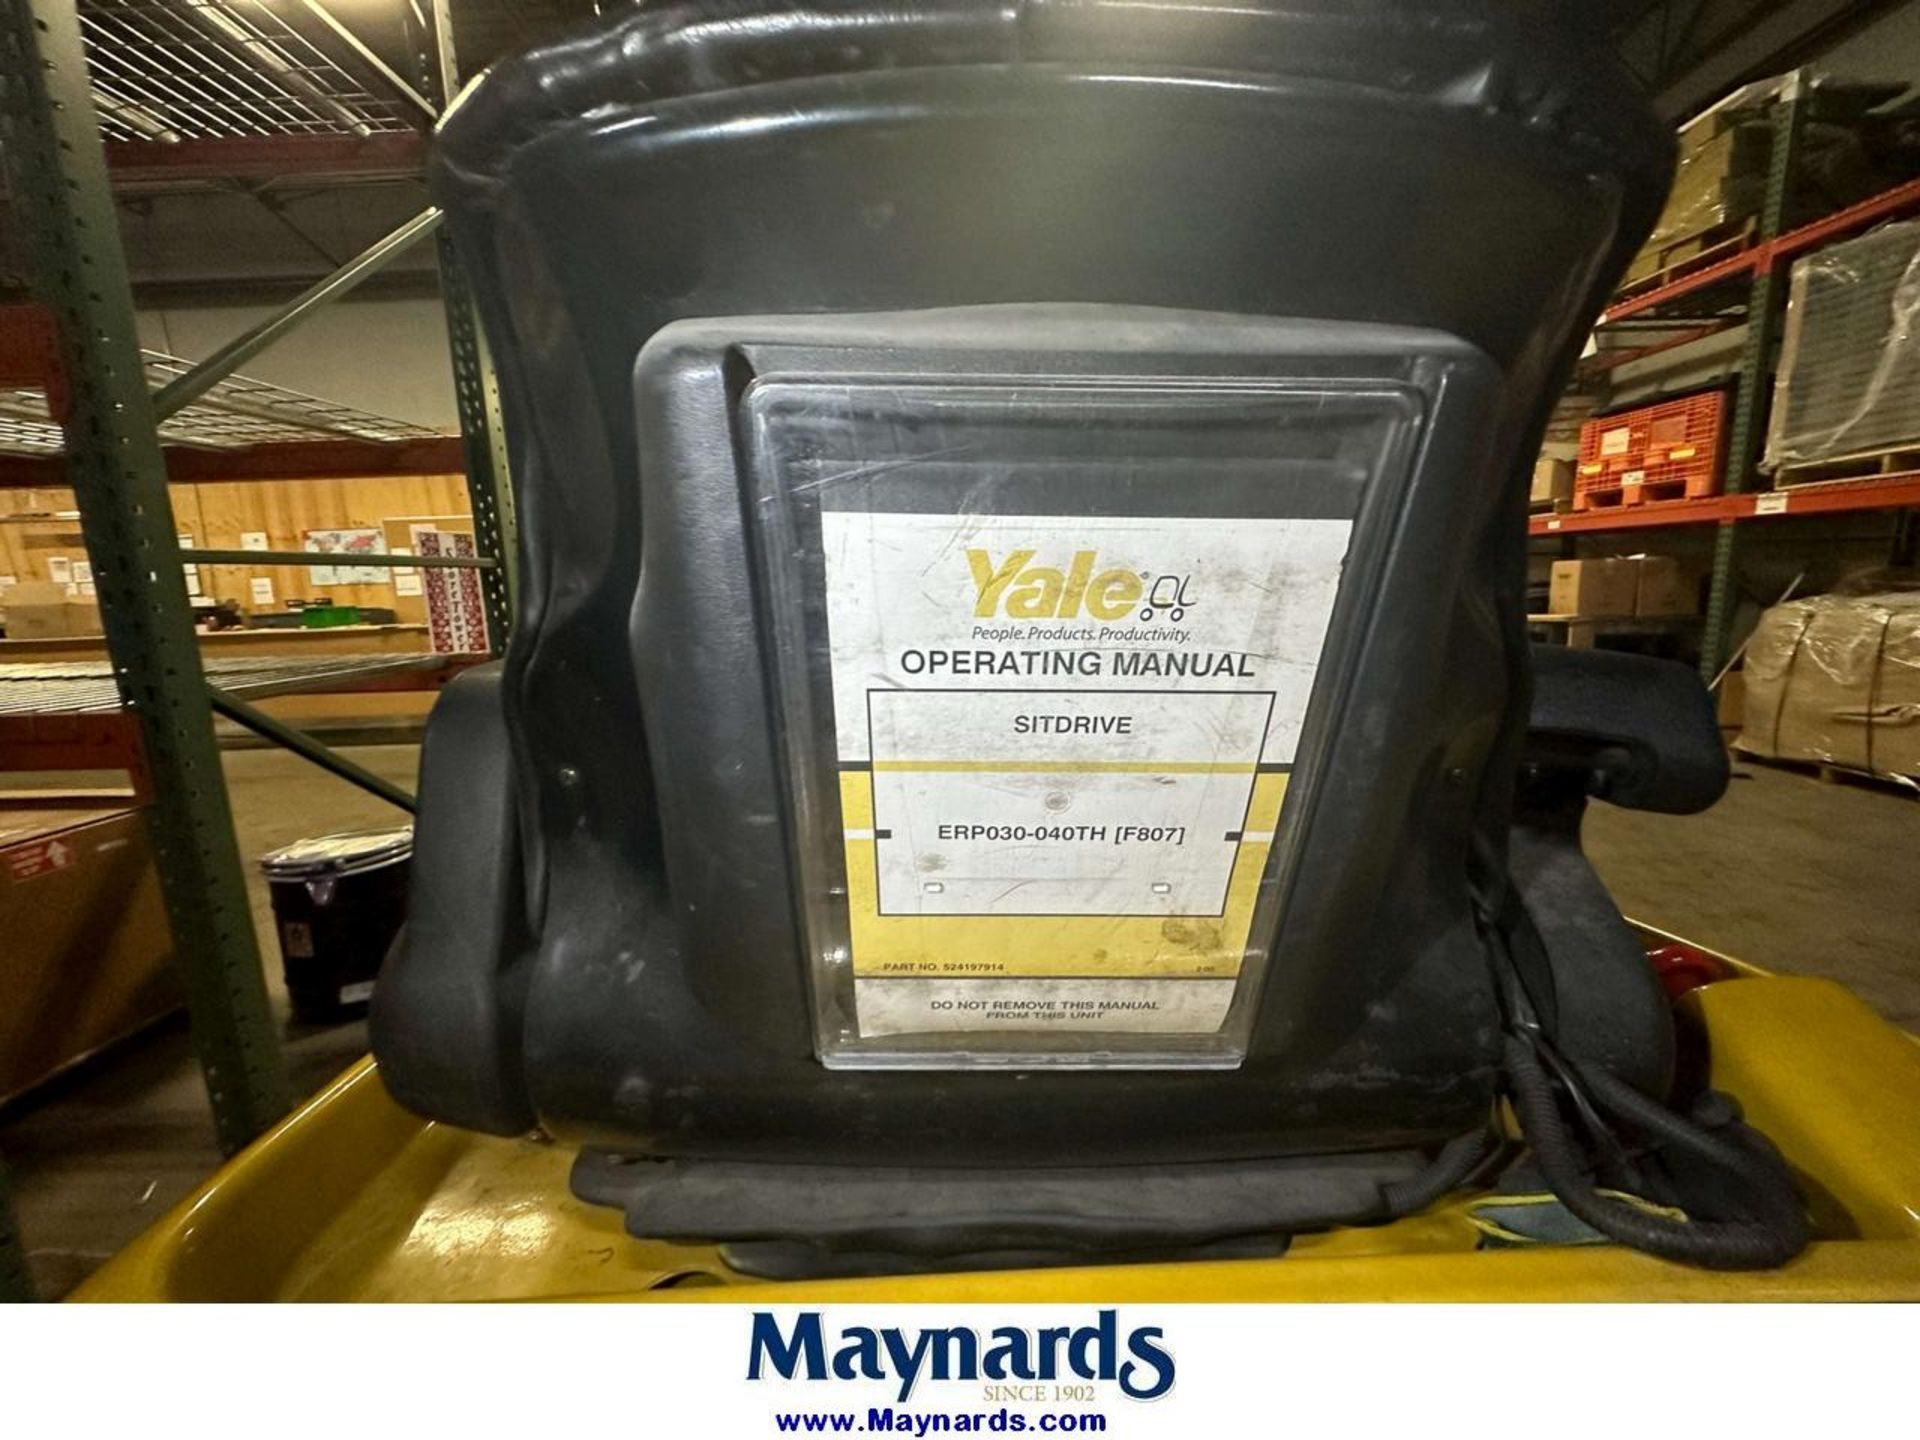 2008 Yale 2,850 Lb. Cap. 3-Wheel Electric Forklift (Late Delivery) - Image 12 of 19